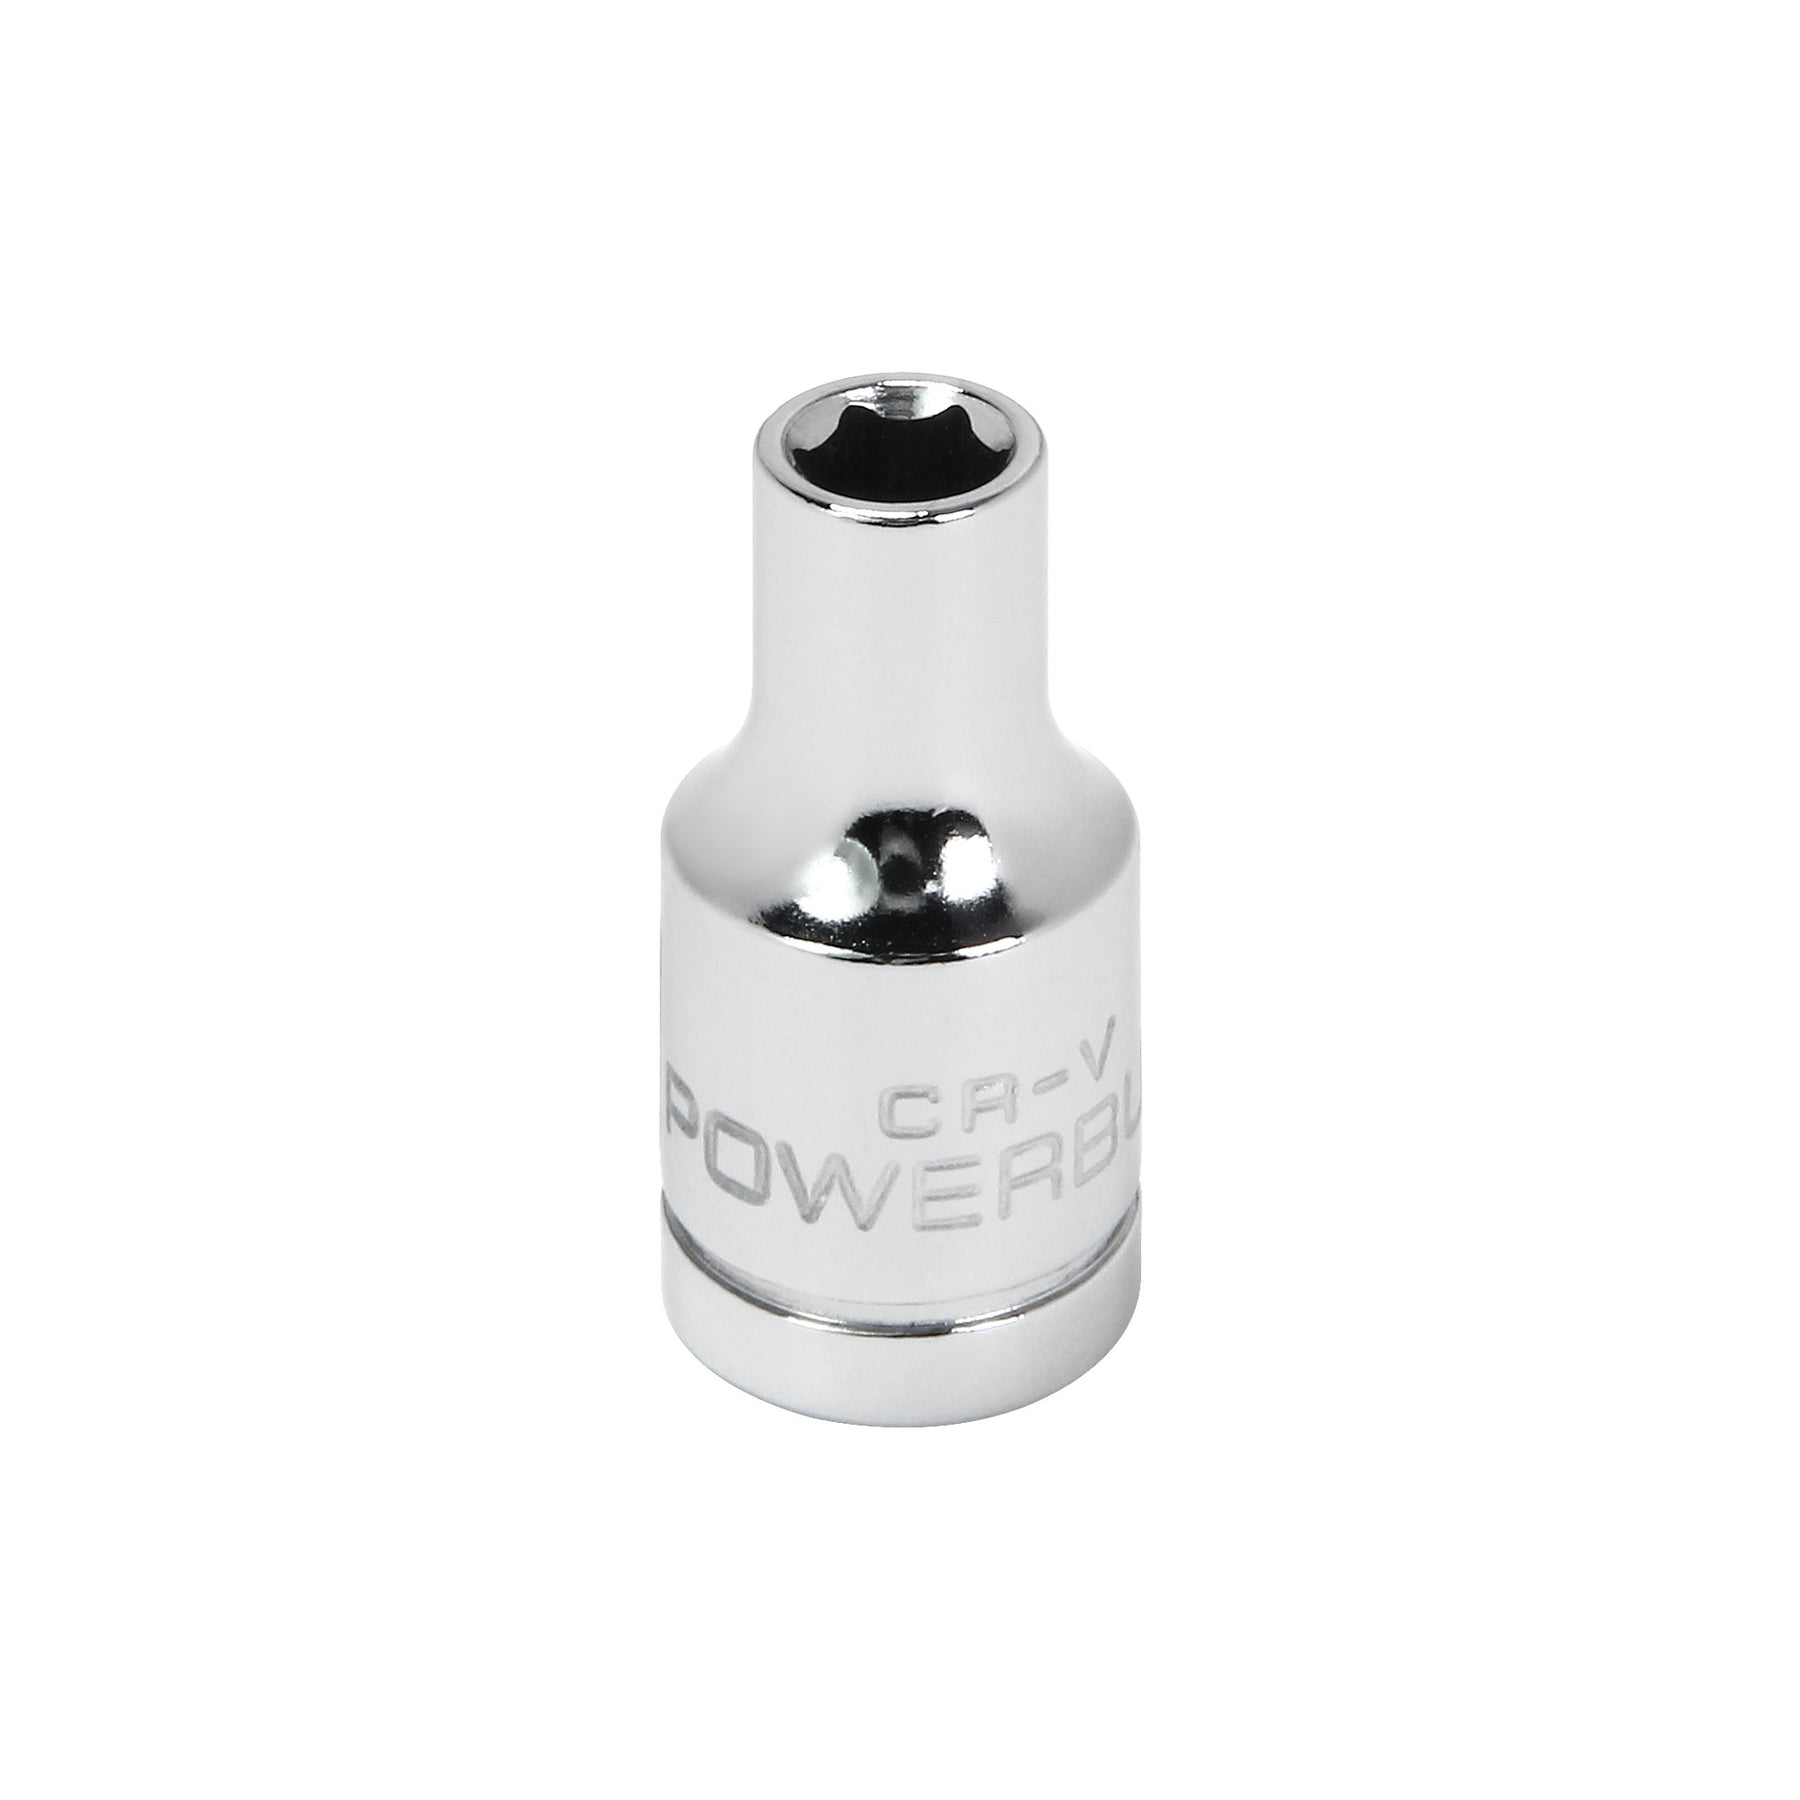 1/4 Inch Drive x 4.5 MM 6 Point Shallow Socket